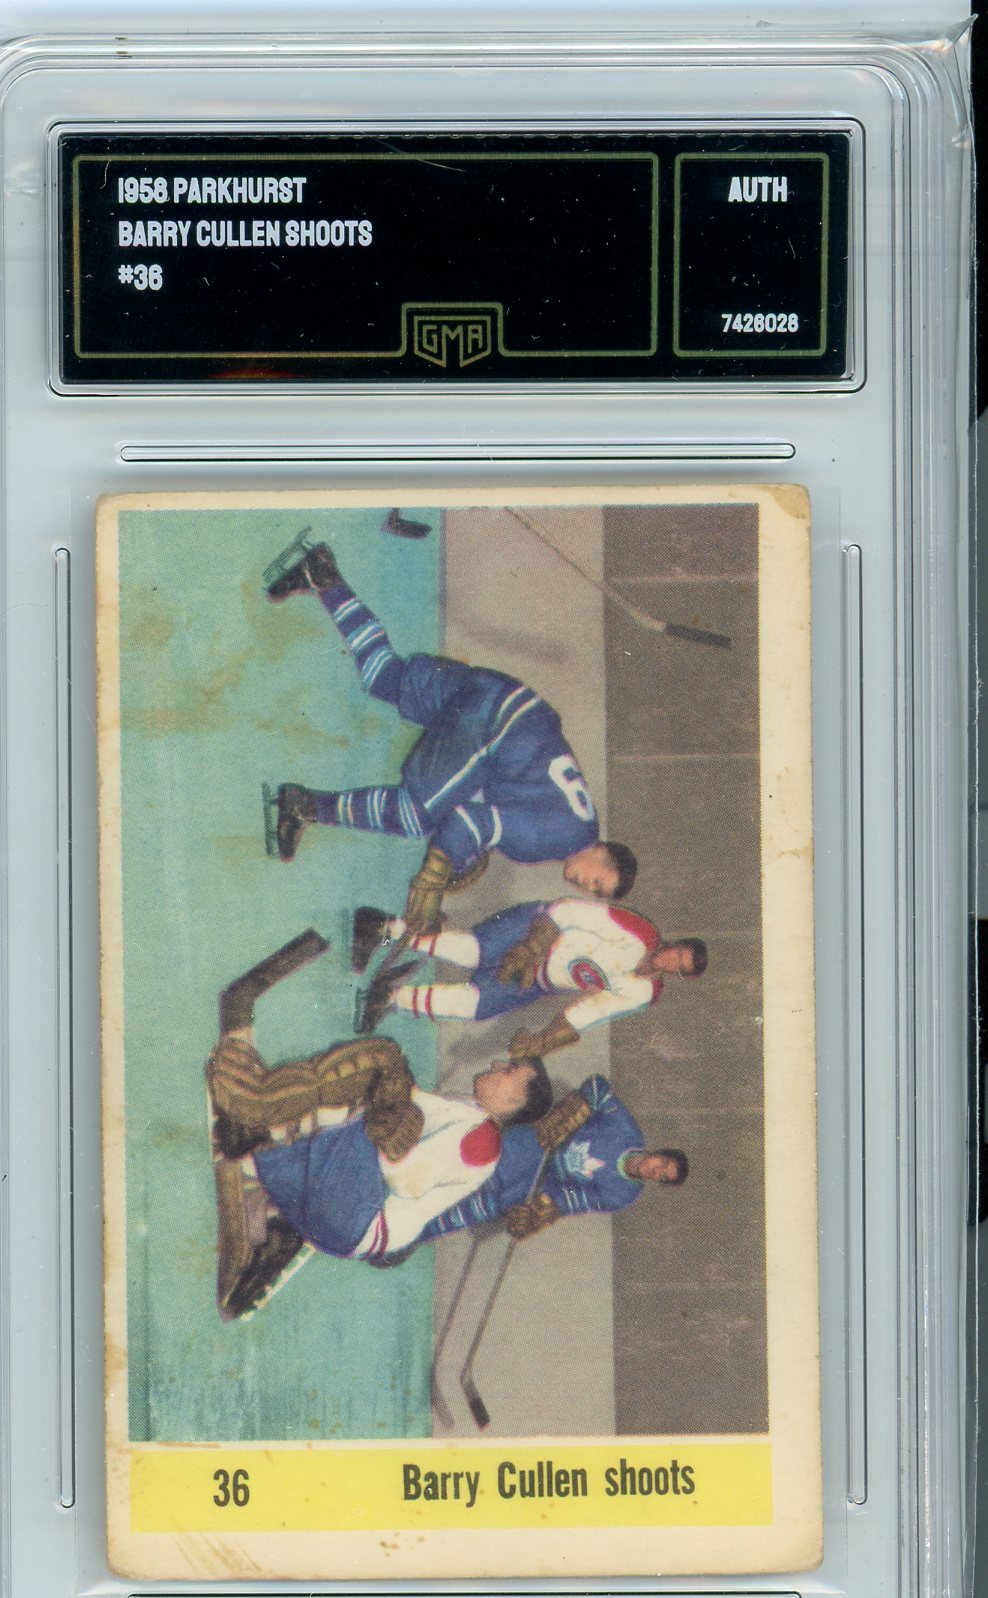 1958 Parkhurst Barry Cullen Shoots #36 Vintage Hockey Card GMA Authenticated